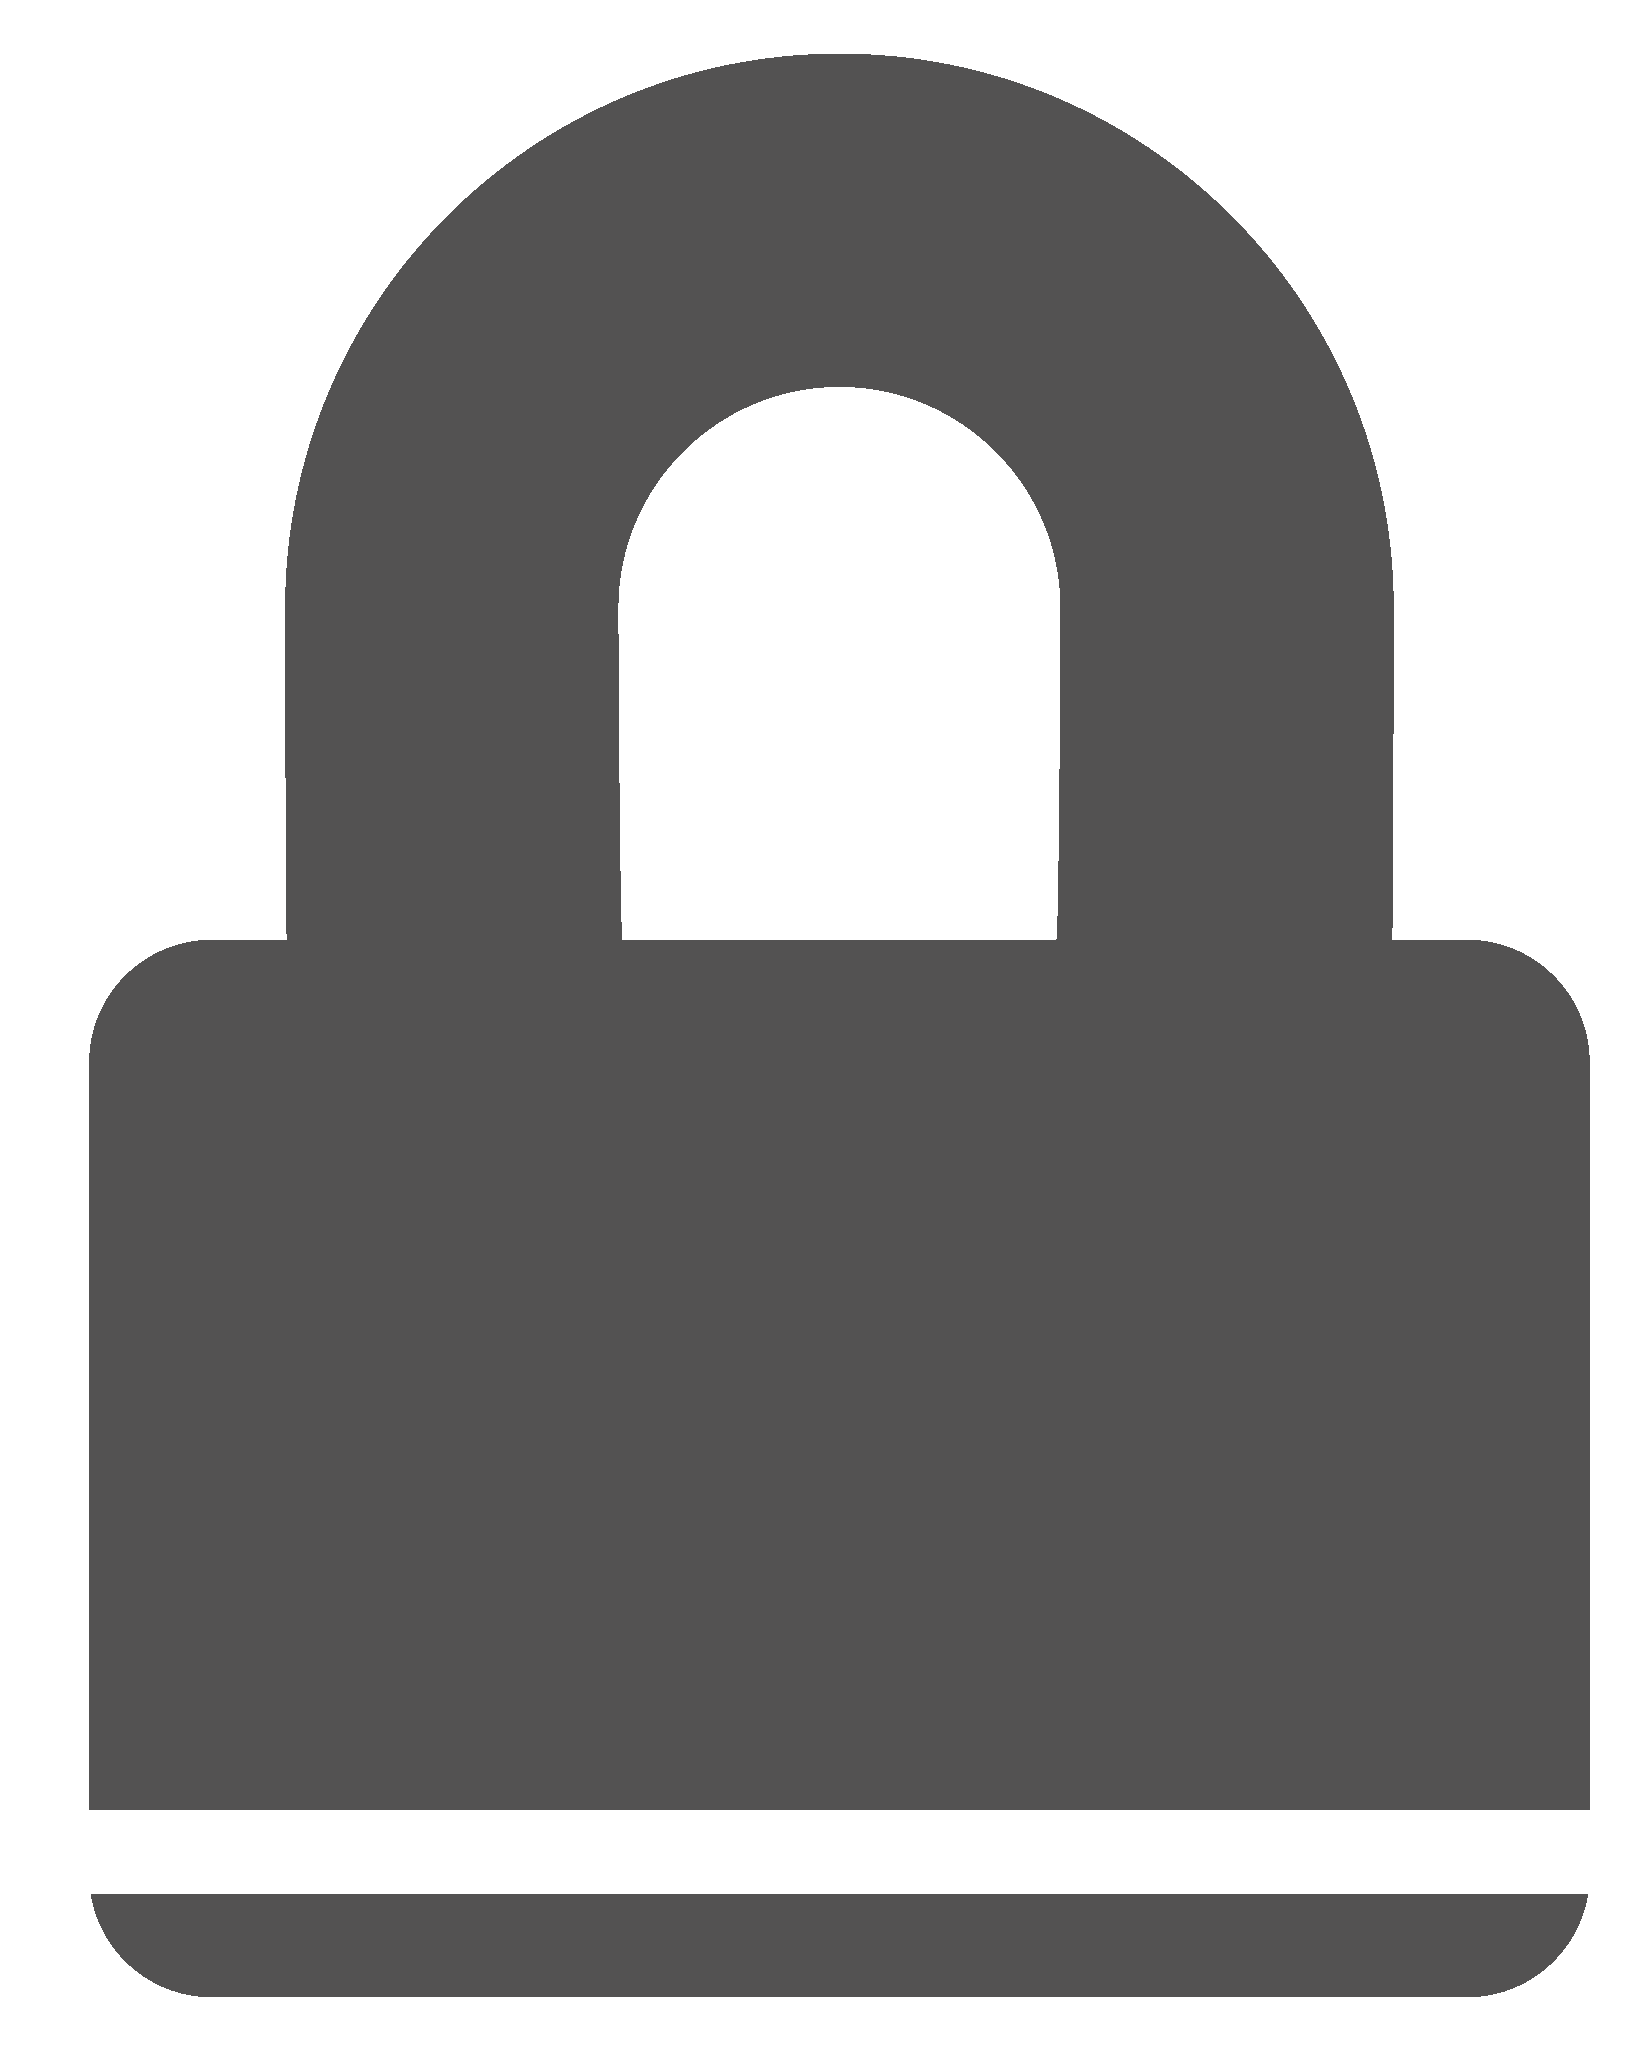 Padlock clipart steel. Hinges latches and locks